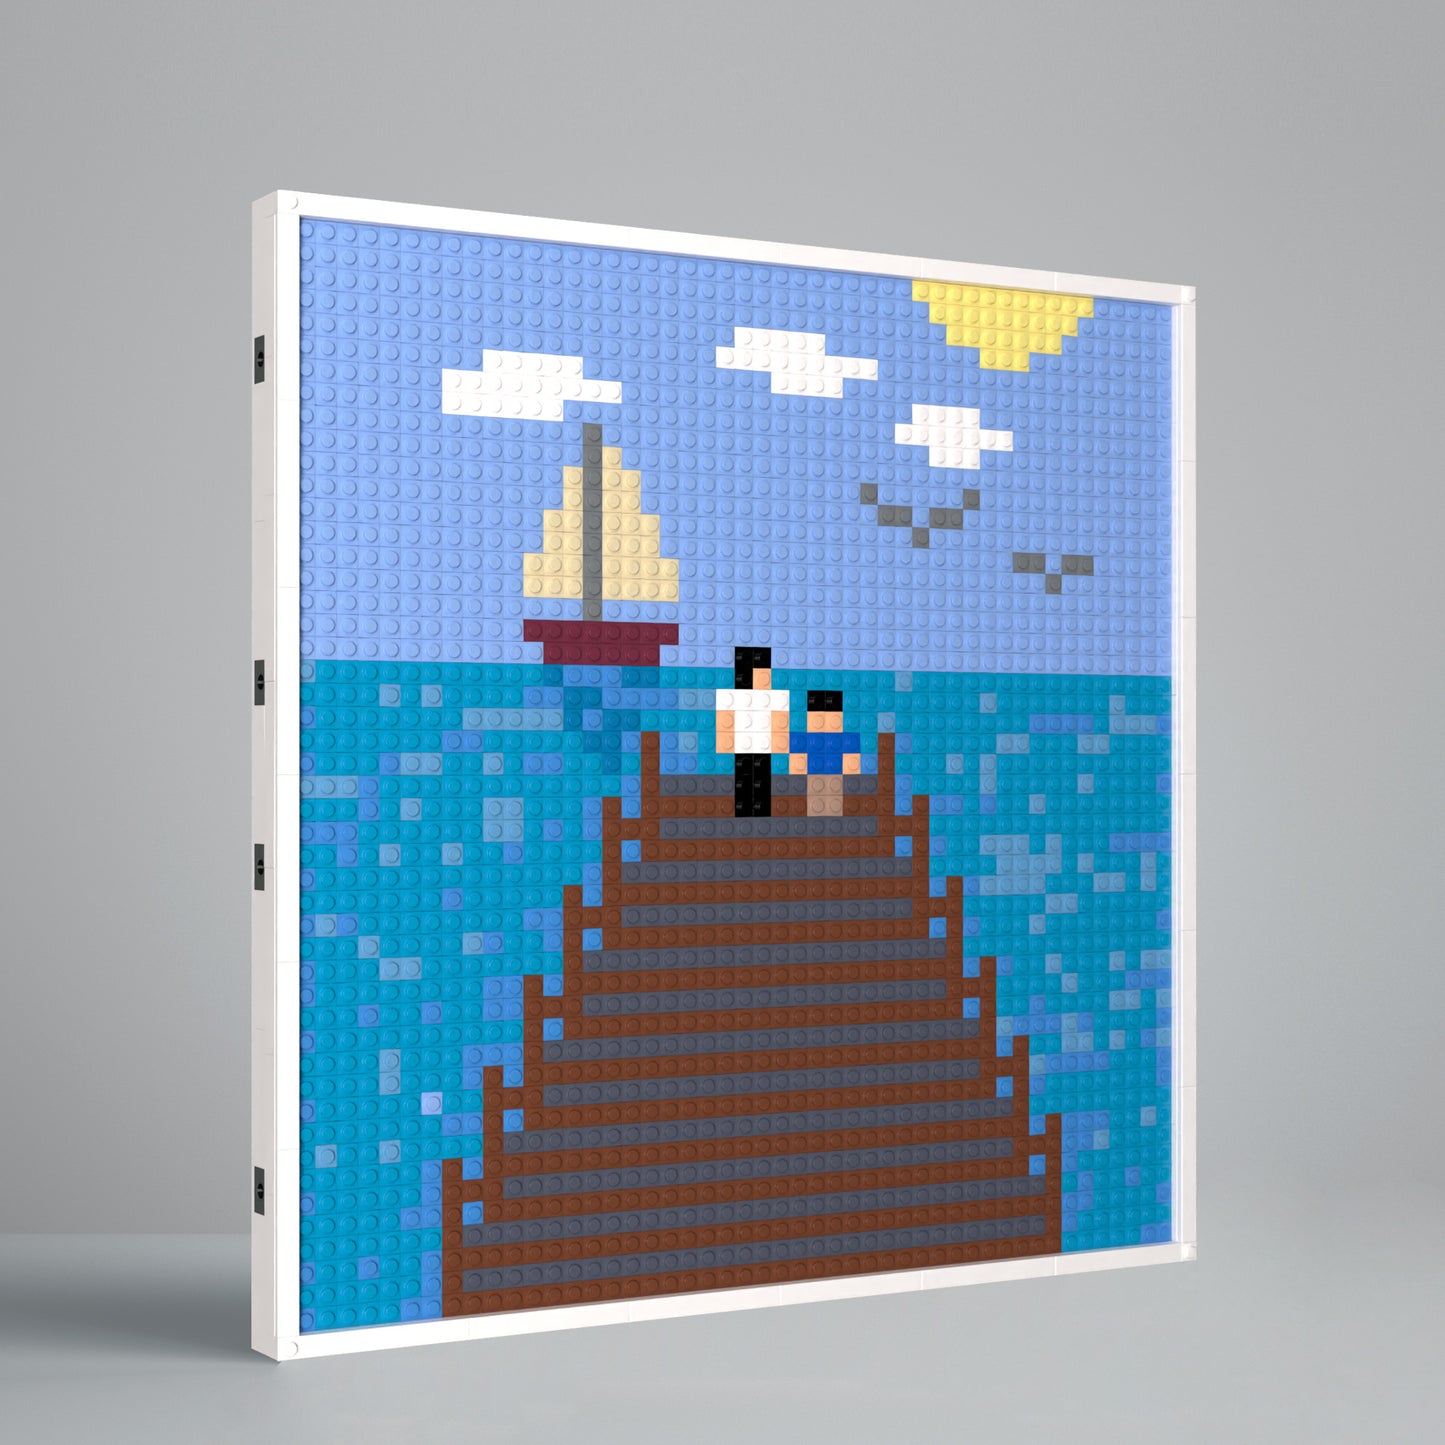 Seascape, A Father and Son Sitting on the Dock, Large Lego Compatible Pixel Art Jigsaw Puzzle